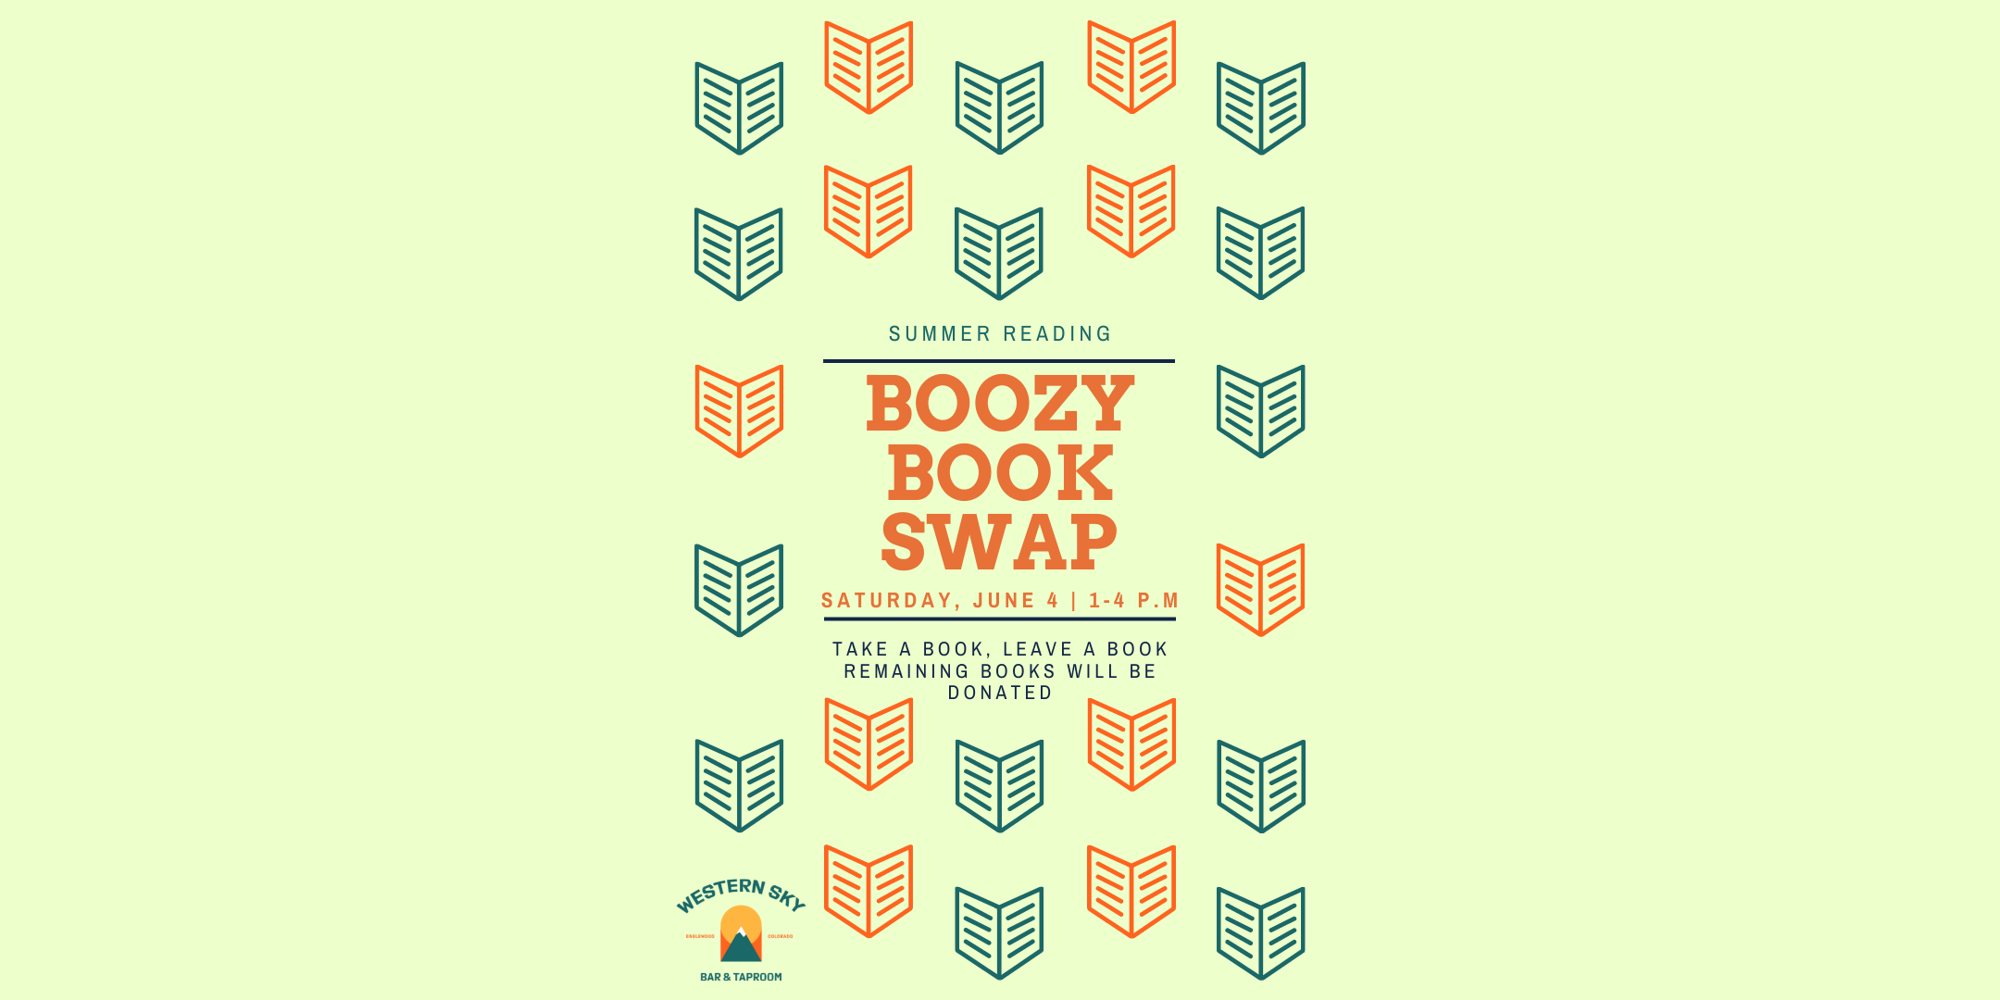 Boozy Book Swap at Western Sky promotional image